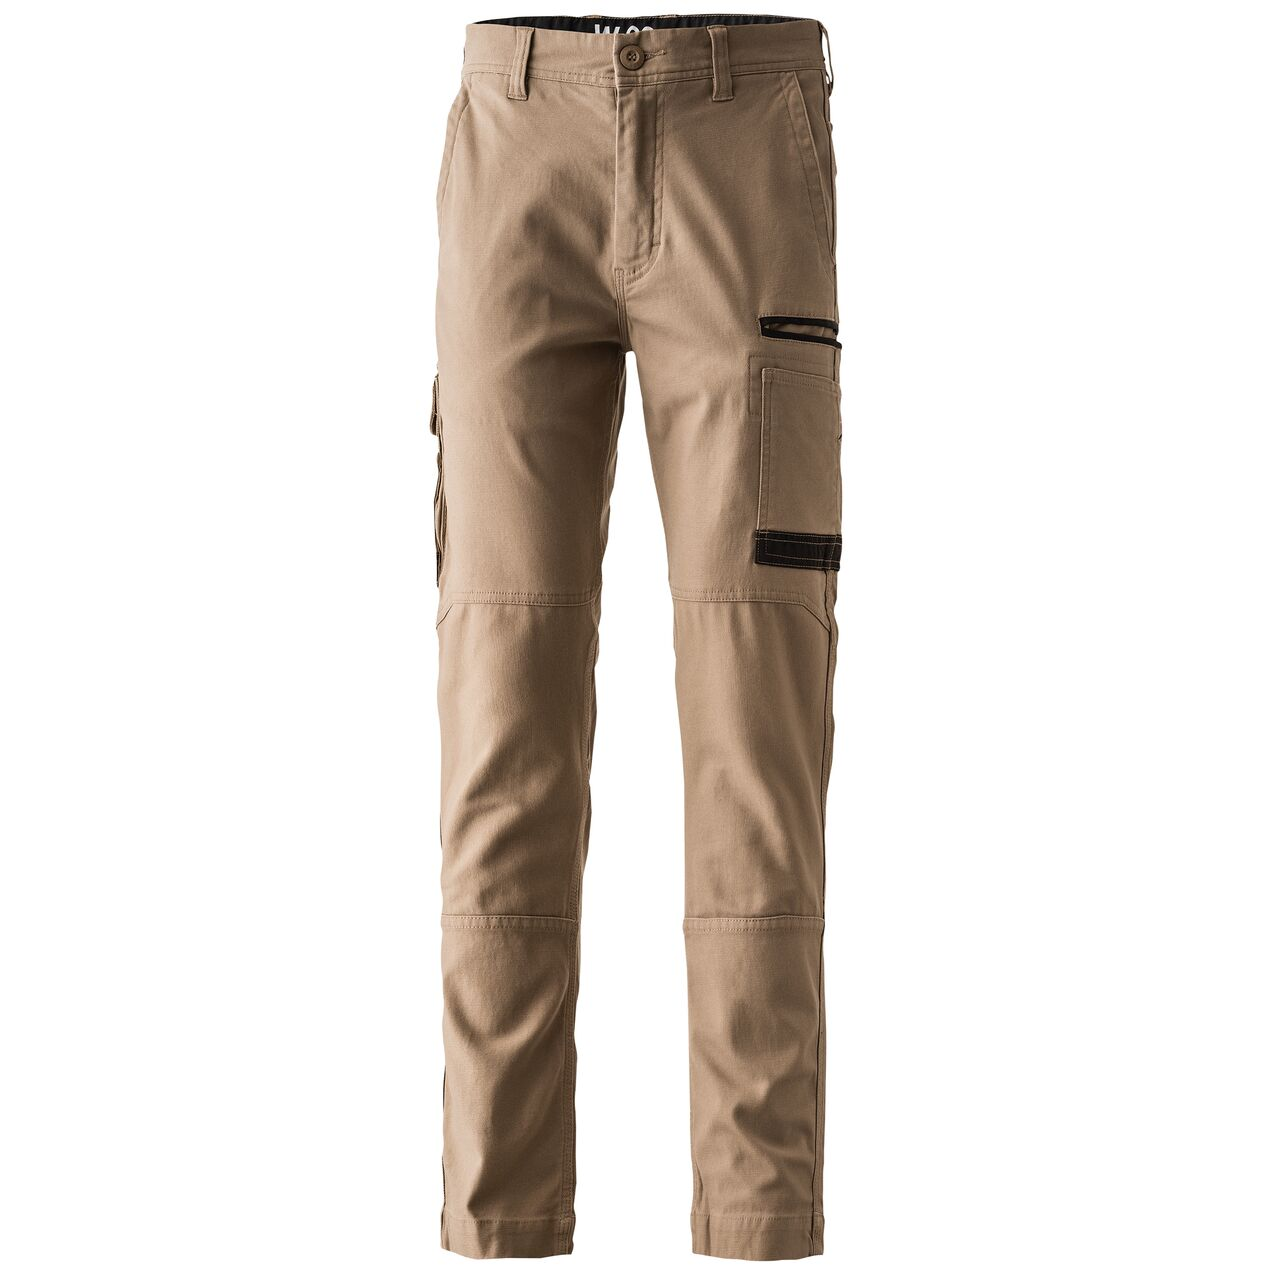 FXD WP-3 STRETCH WORK PANT